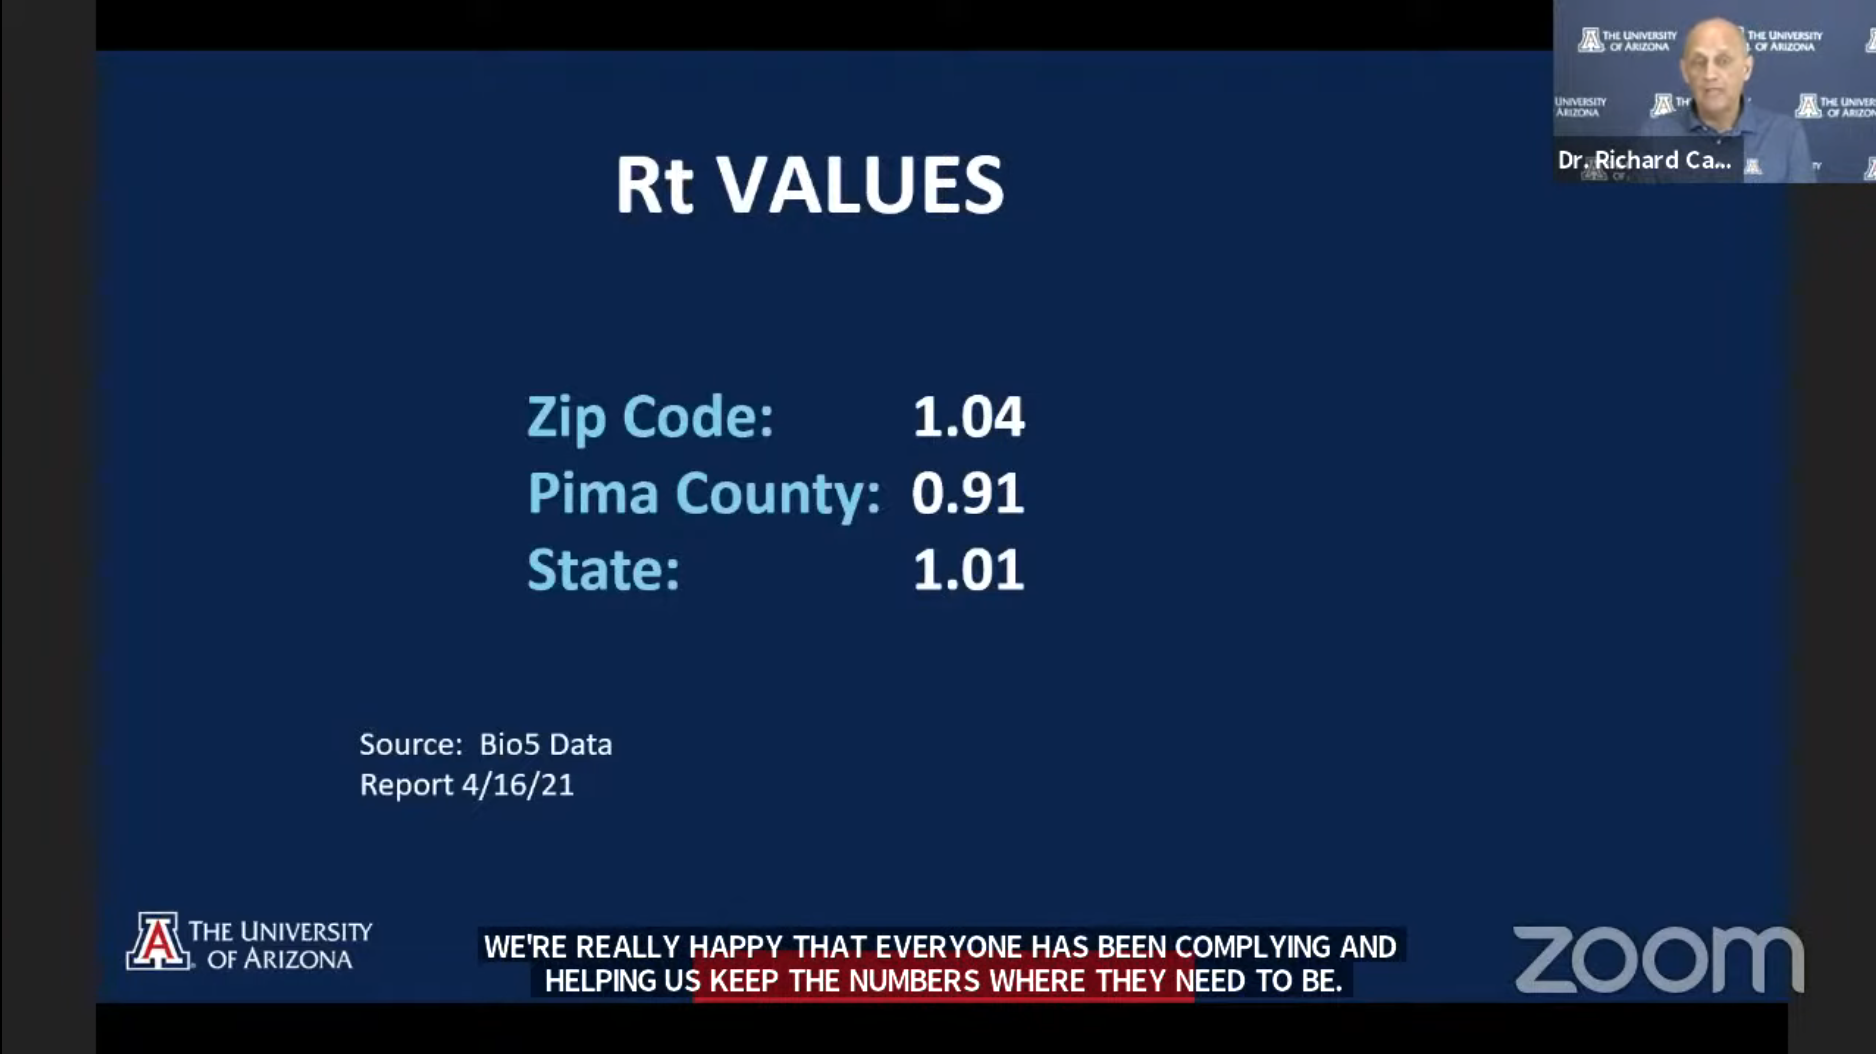 Screenshot of Rate of Transmission values from the university zip-code and Pima County, which are at 1.04 and .91 respectively.